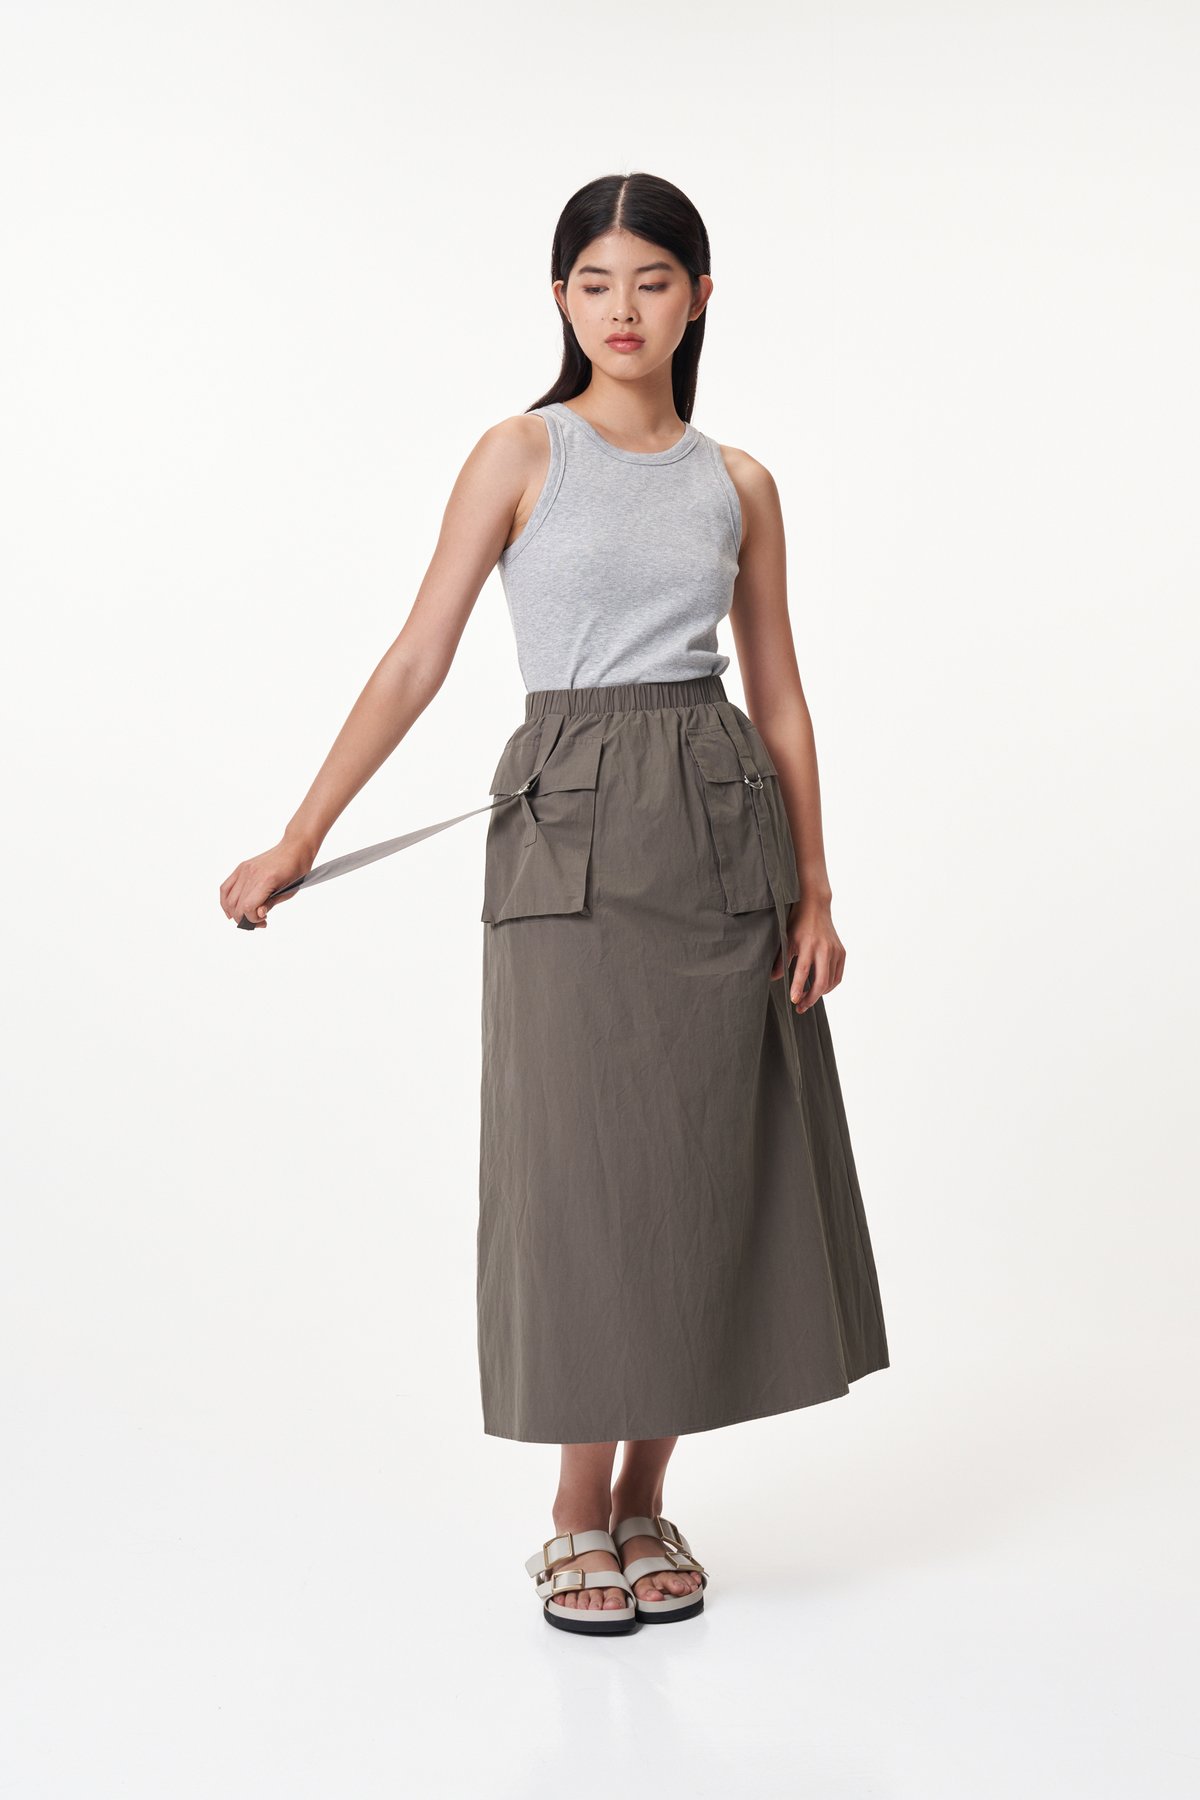 Lancer Parachute Skirt in Charcoal